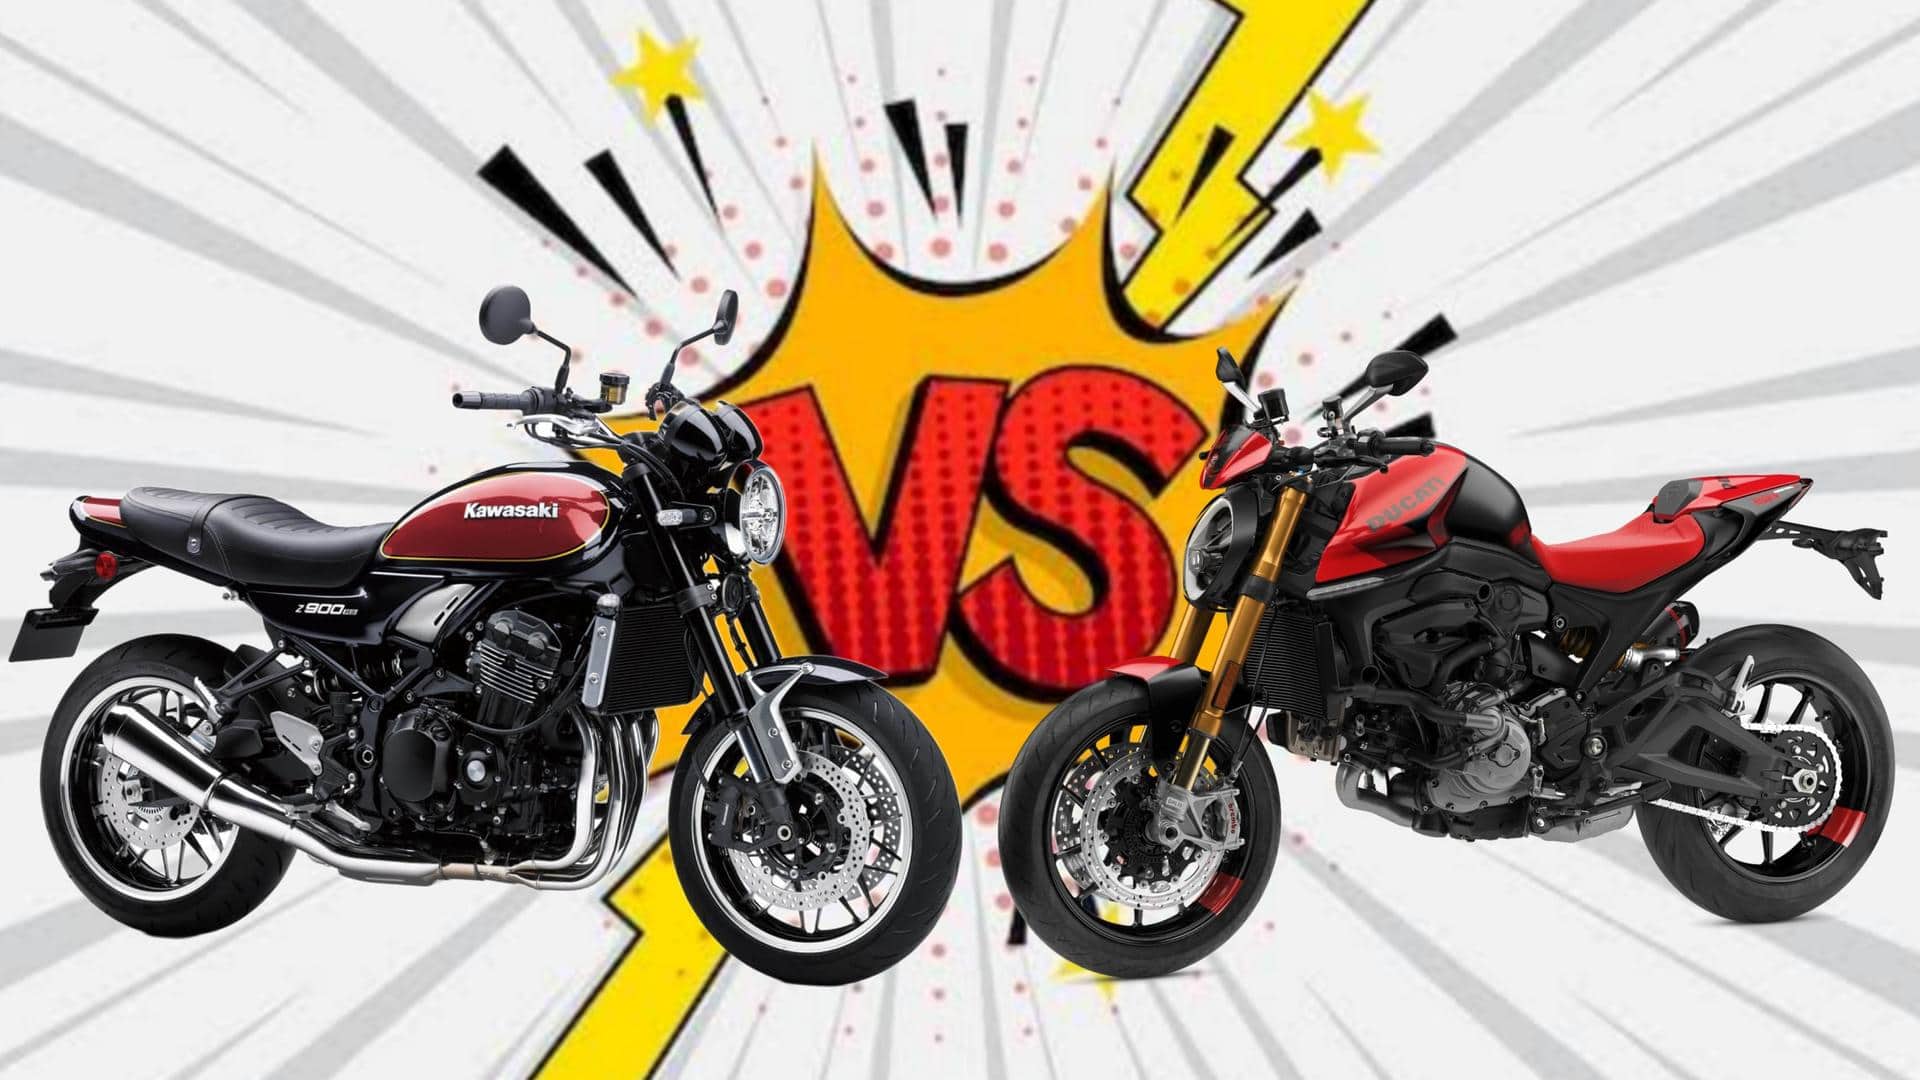 Ducati Monster SP v/s Kawasaki Z900RS: Which one to buy